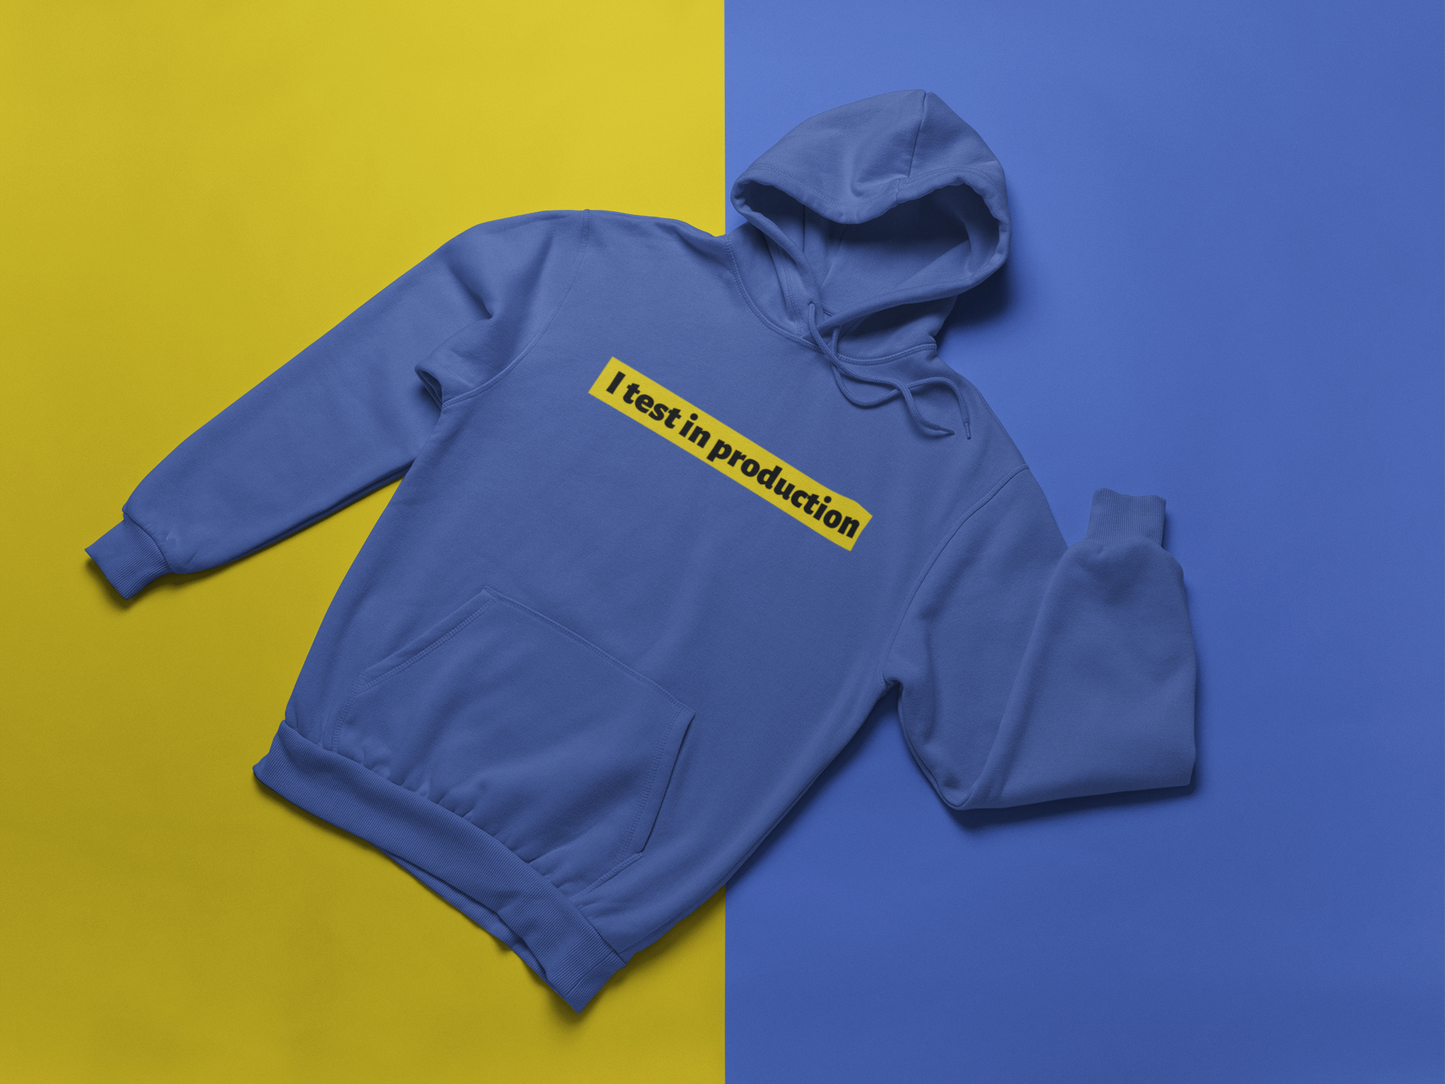 I test in production - Heavy Blend™ Hoodie